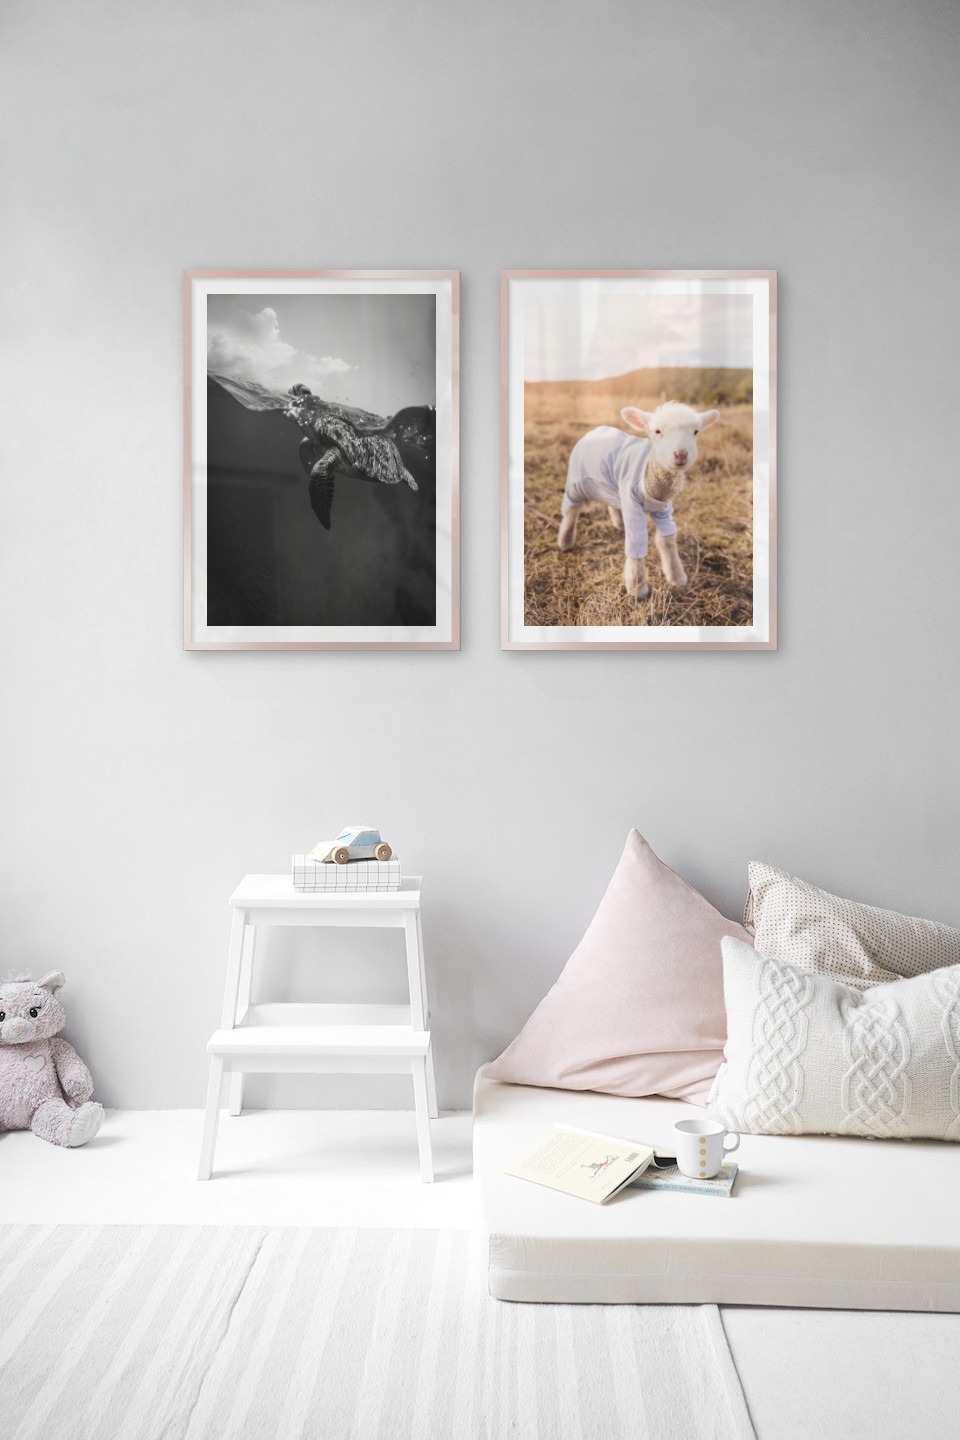 Gallery wall with picture frames in copper in sizes 50x70 with prints "Turtle" and "Lamb"